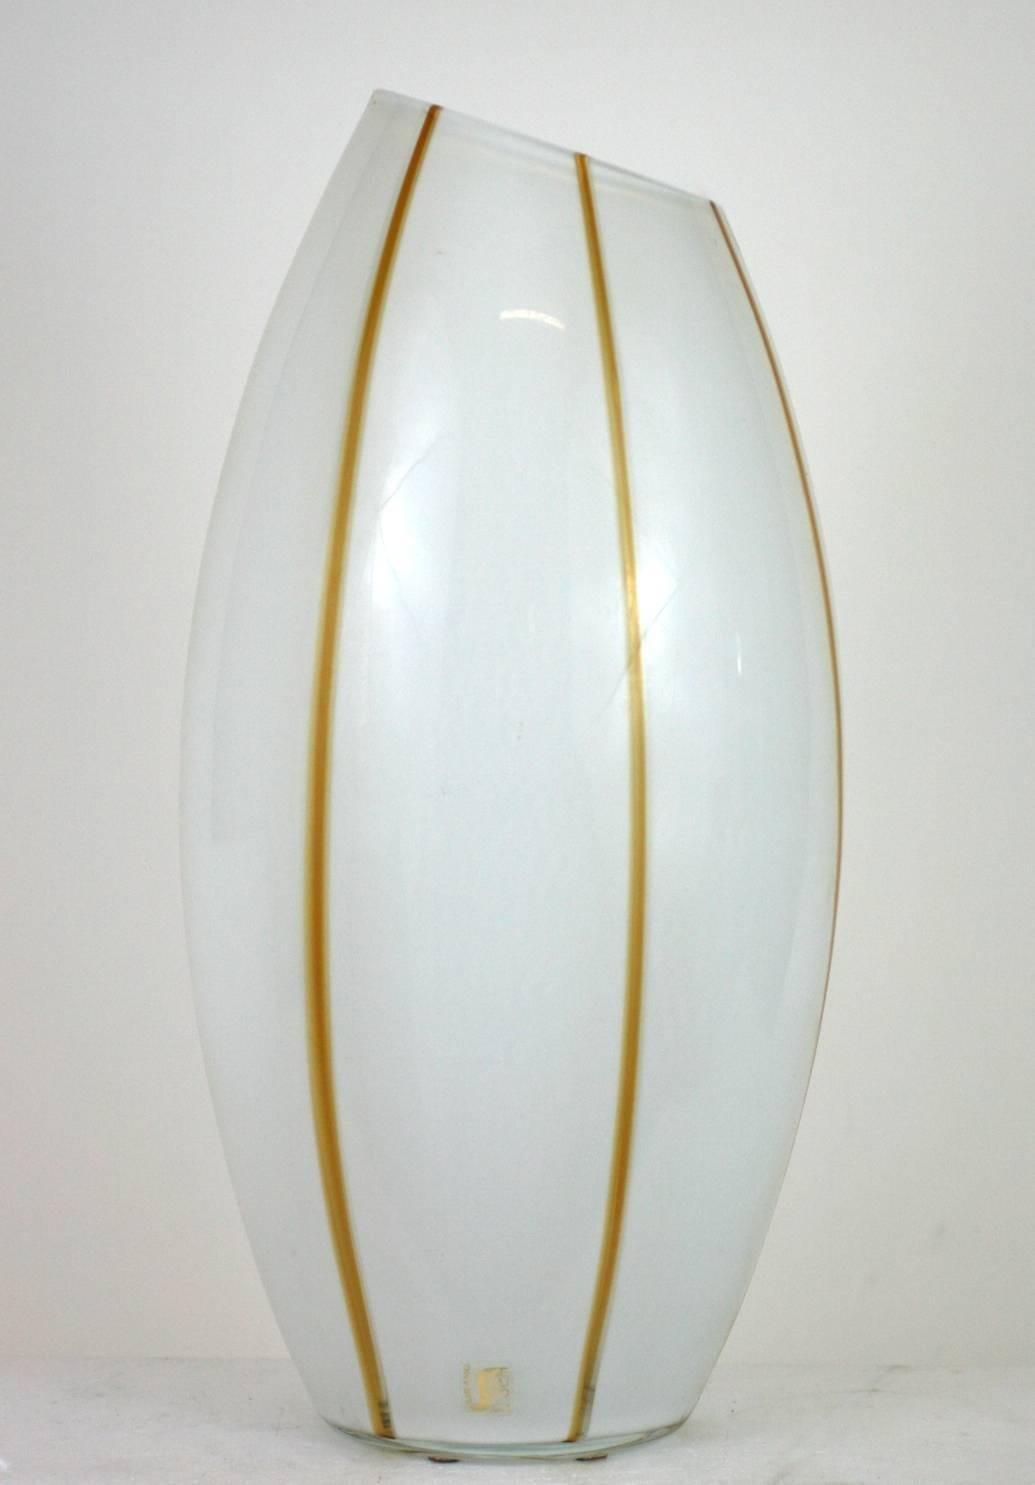 Seguso white and caramel stripe glass vase. Uncirculated sample stock, new,
1960s, Italy.
Measures: 16